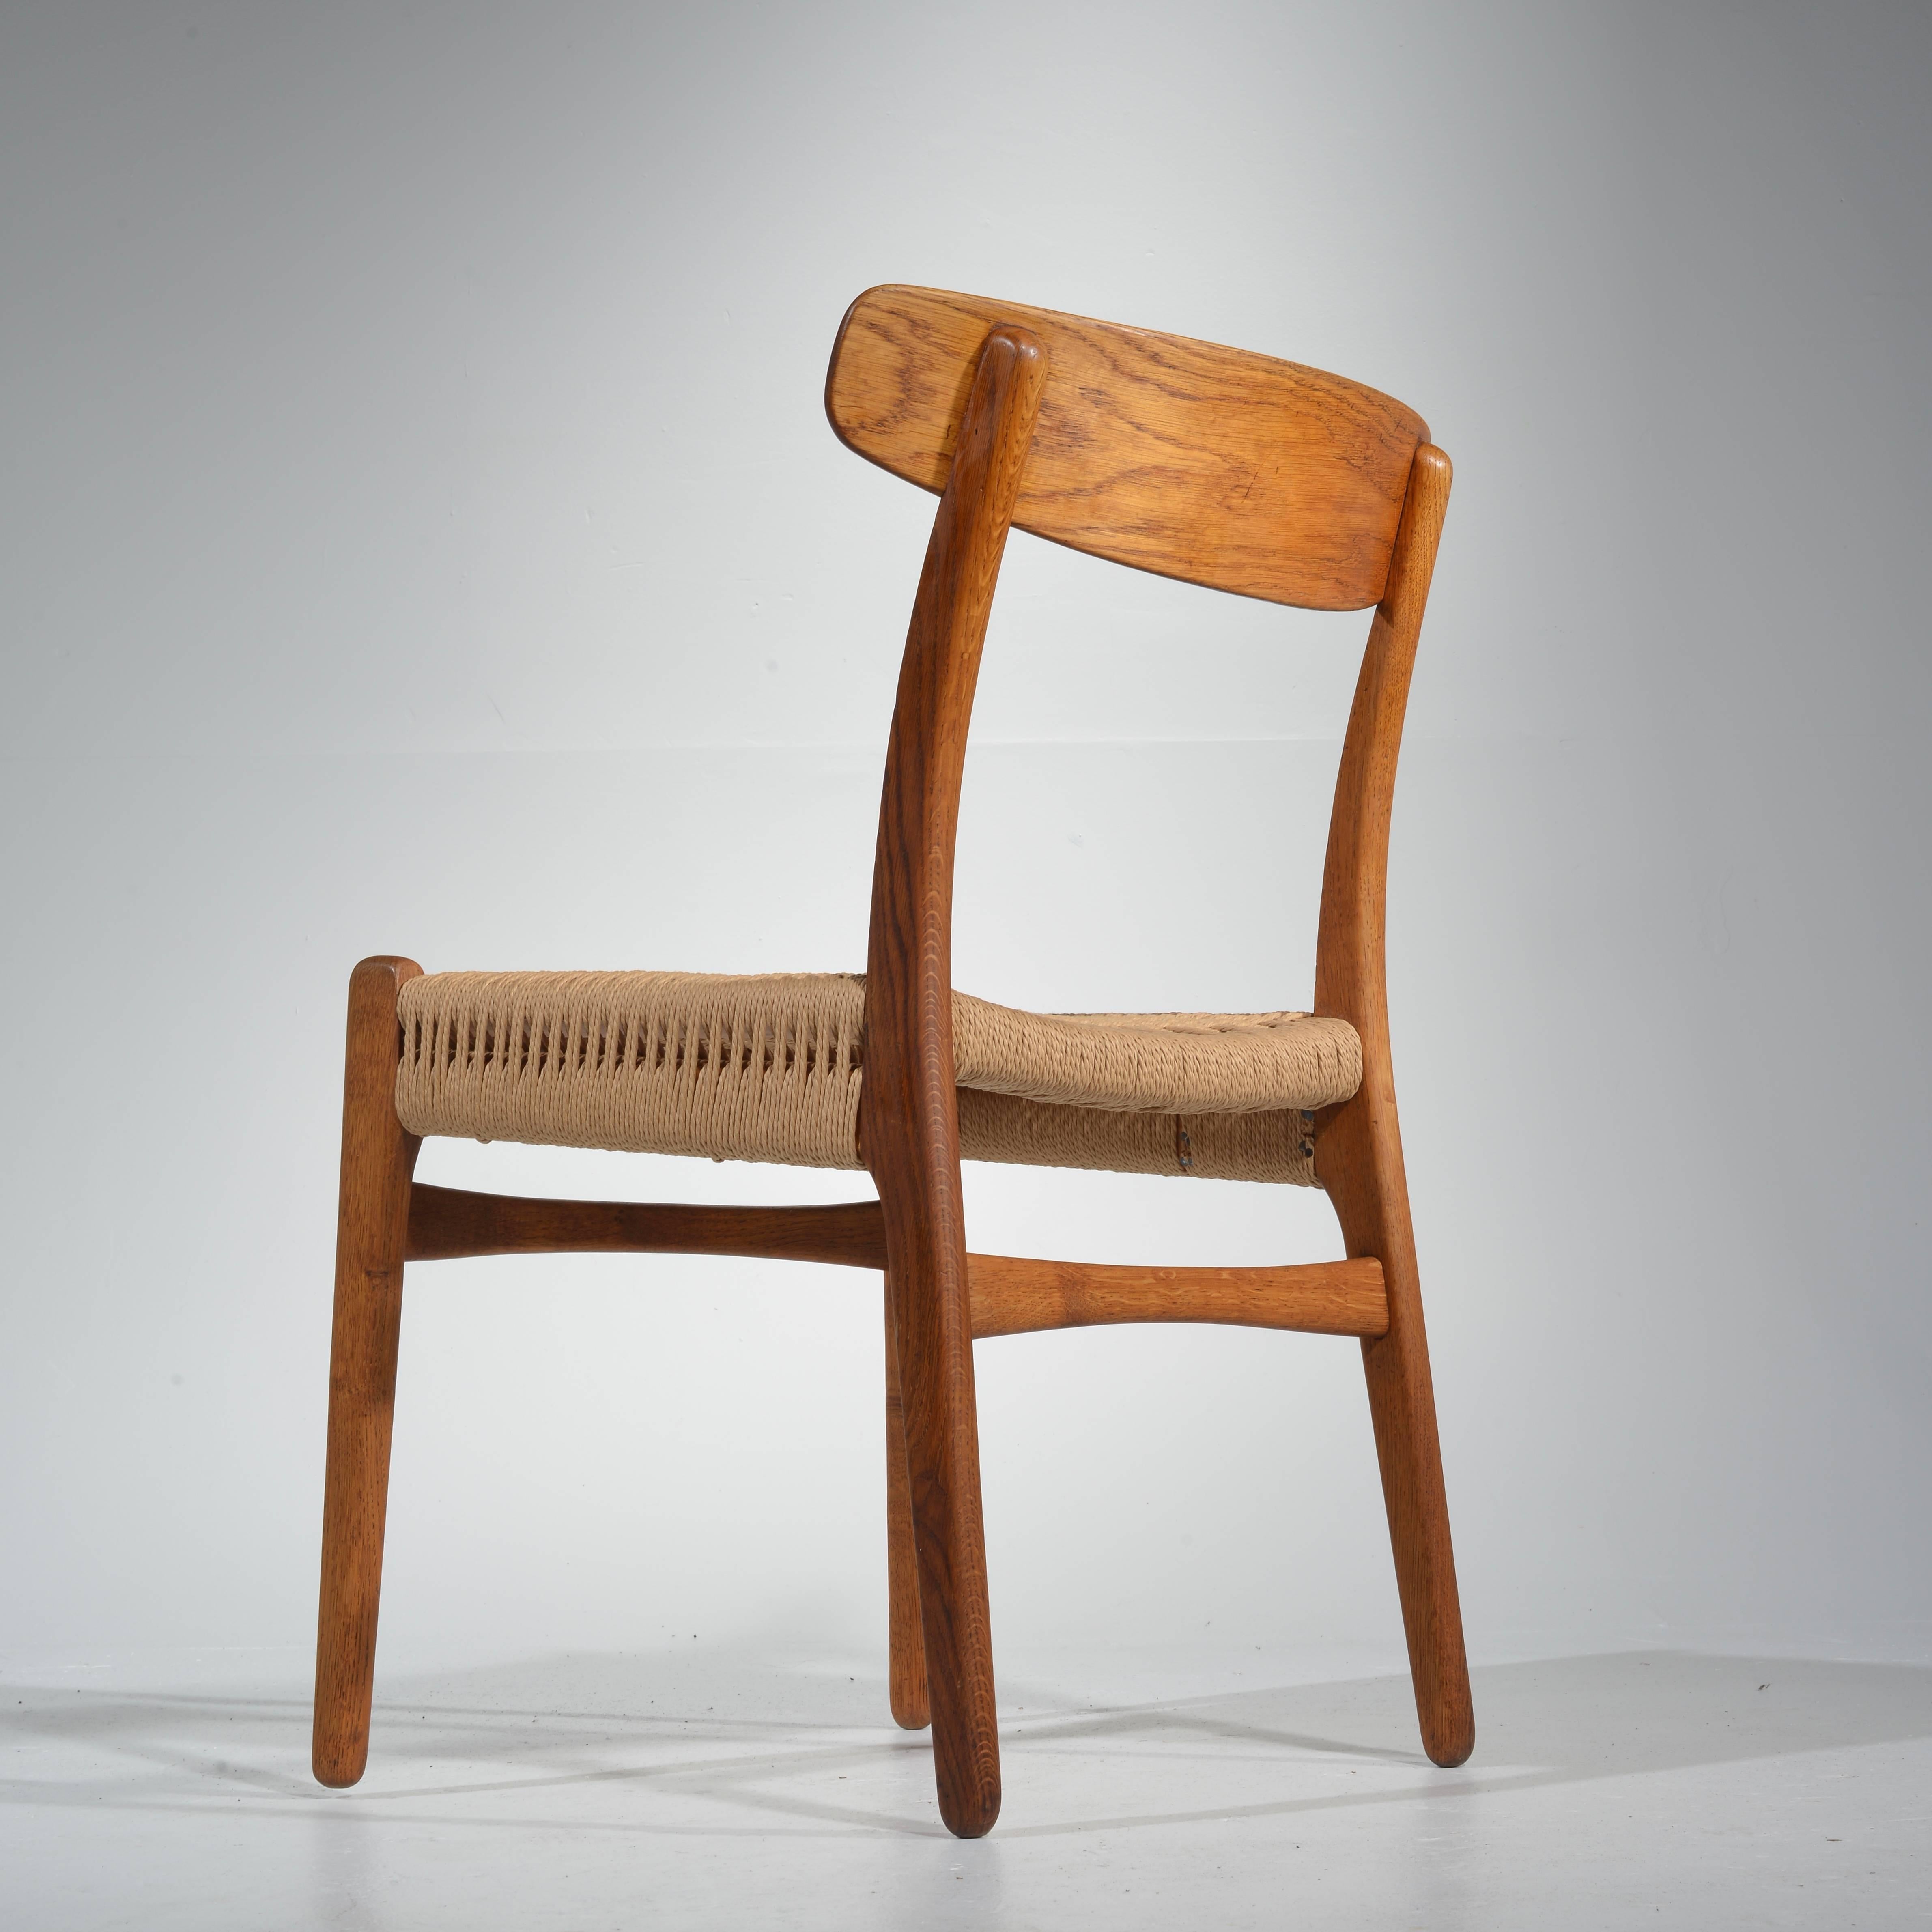 Mid-20th Century Early Hans Wegner Dining Chairs Model CH-23 by Carl Hansen & Son, Denmark For Sale